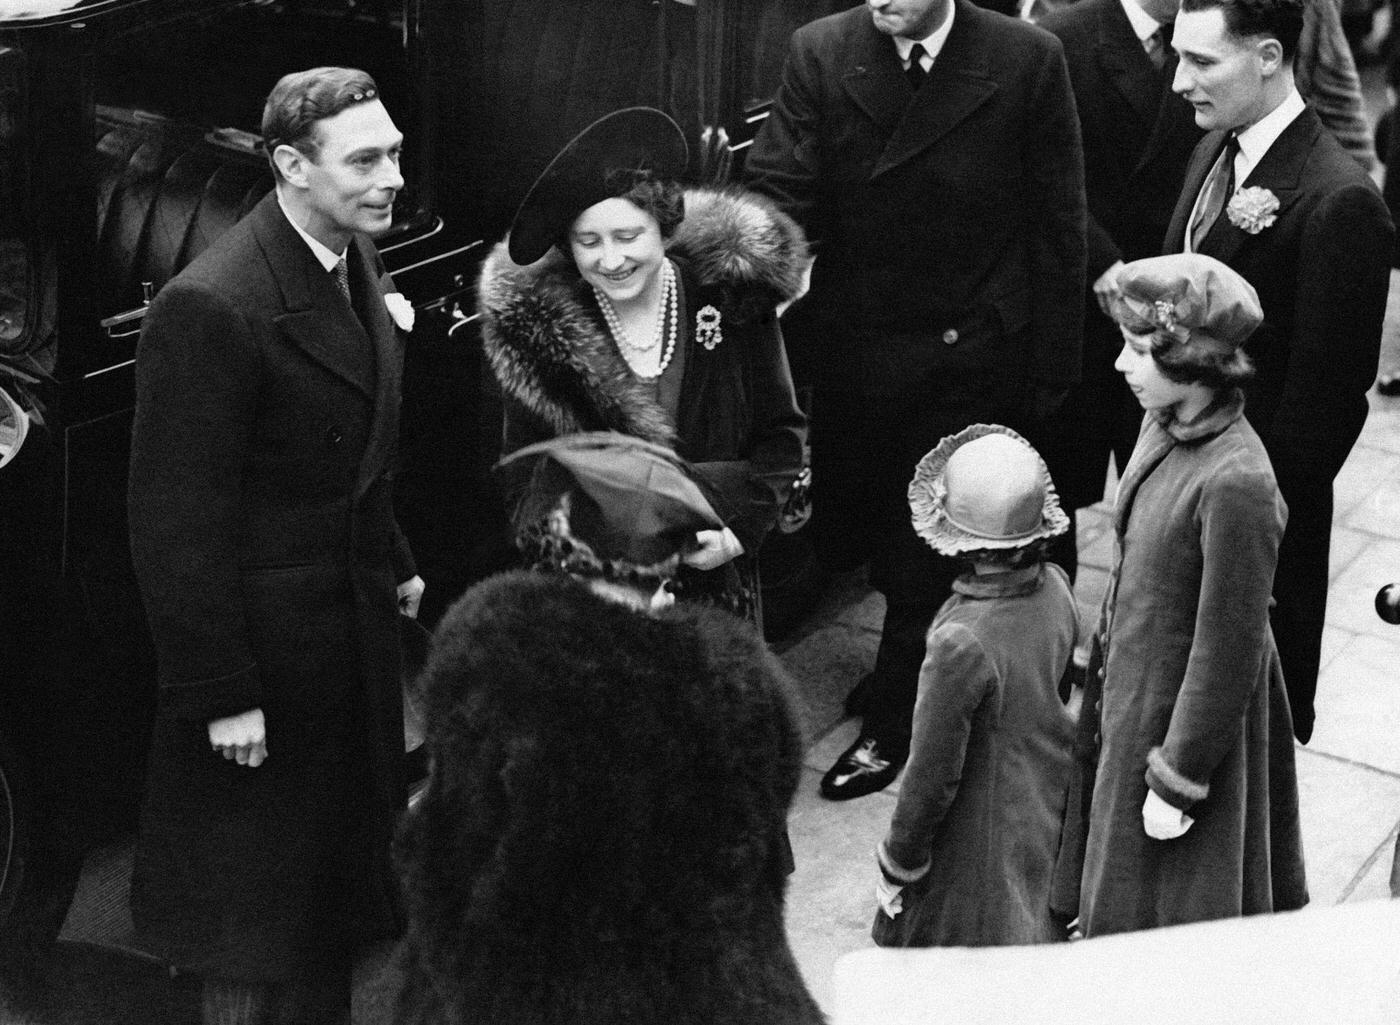 King George VI and Queen Elizabeth arrive at the wedding of Cecilia Bowes-Lyon, a niece of the queen, and Kenneth Harington on March 8th, 1939 in London, UK.